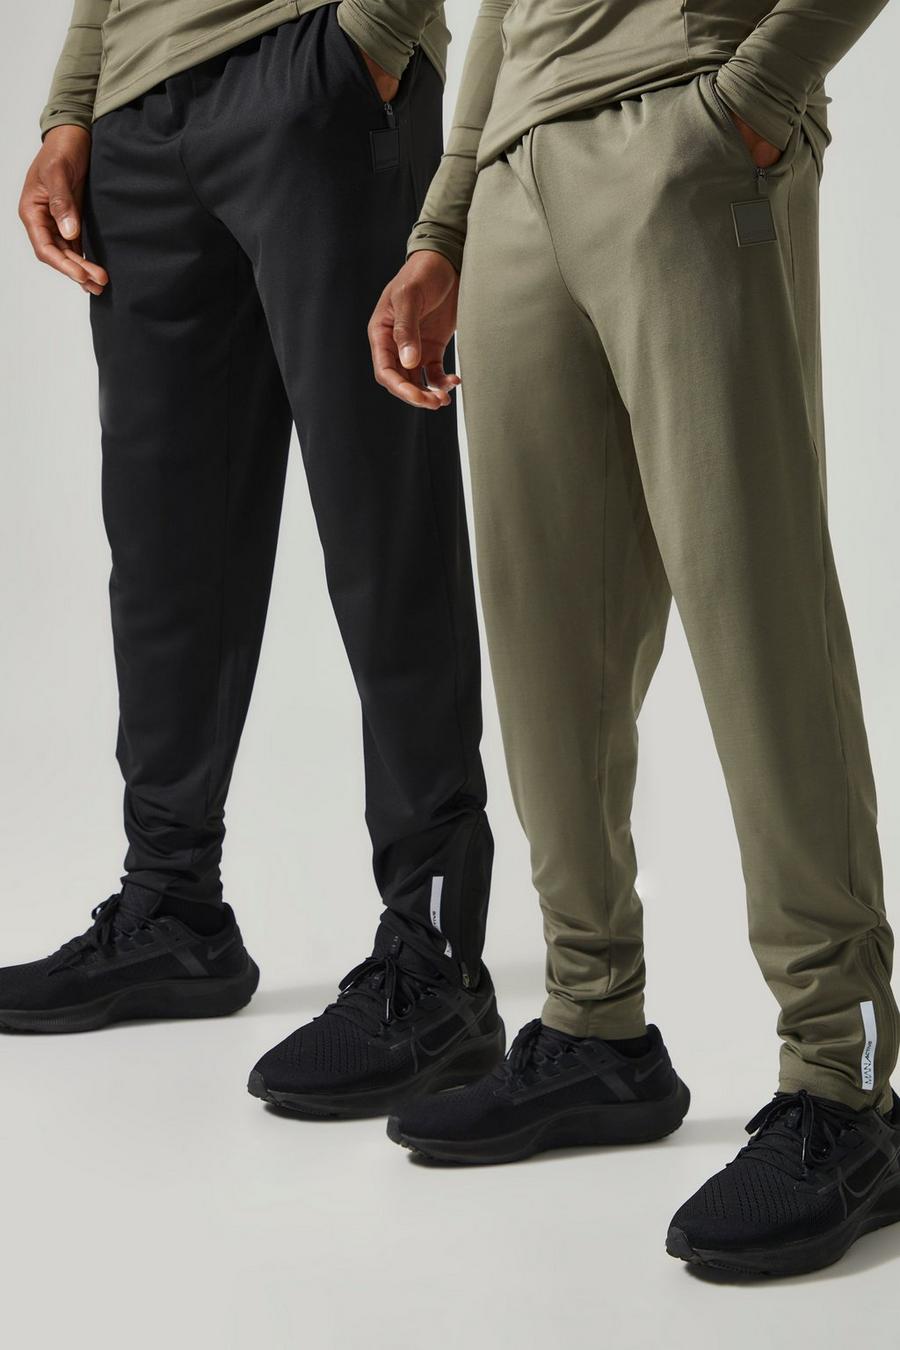 Stylish and Functional Gym Joggers for Men